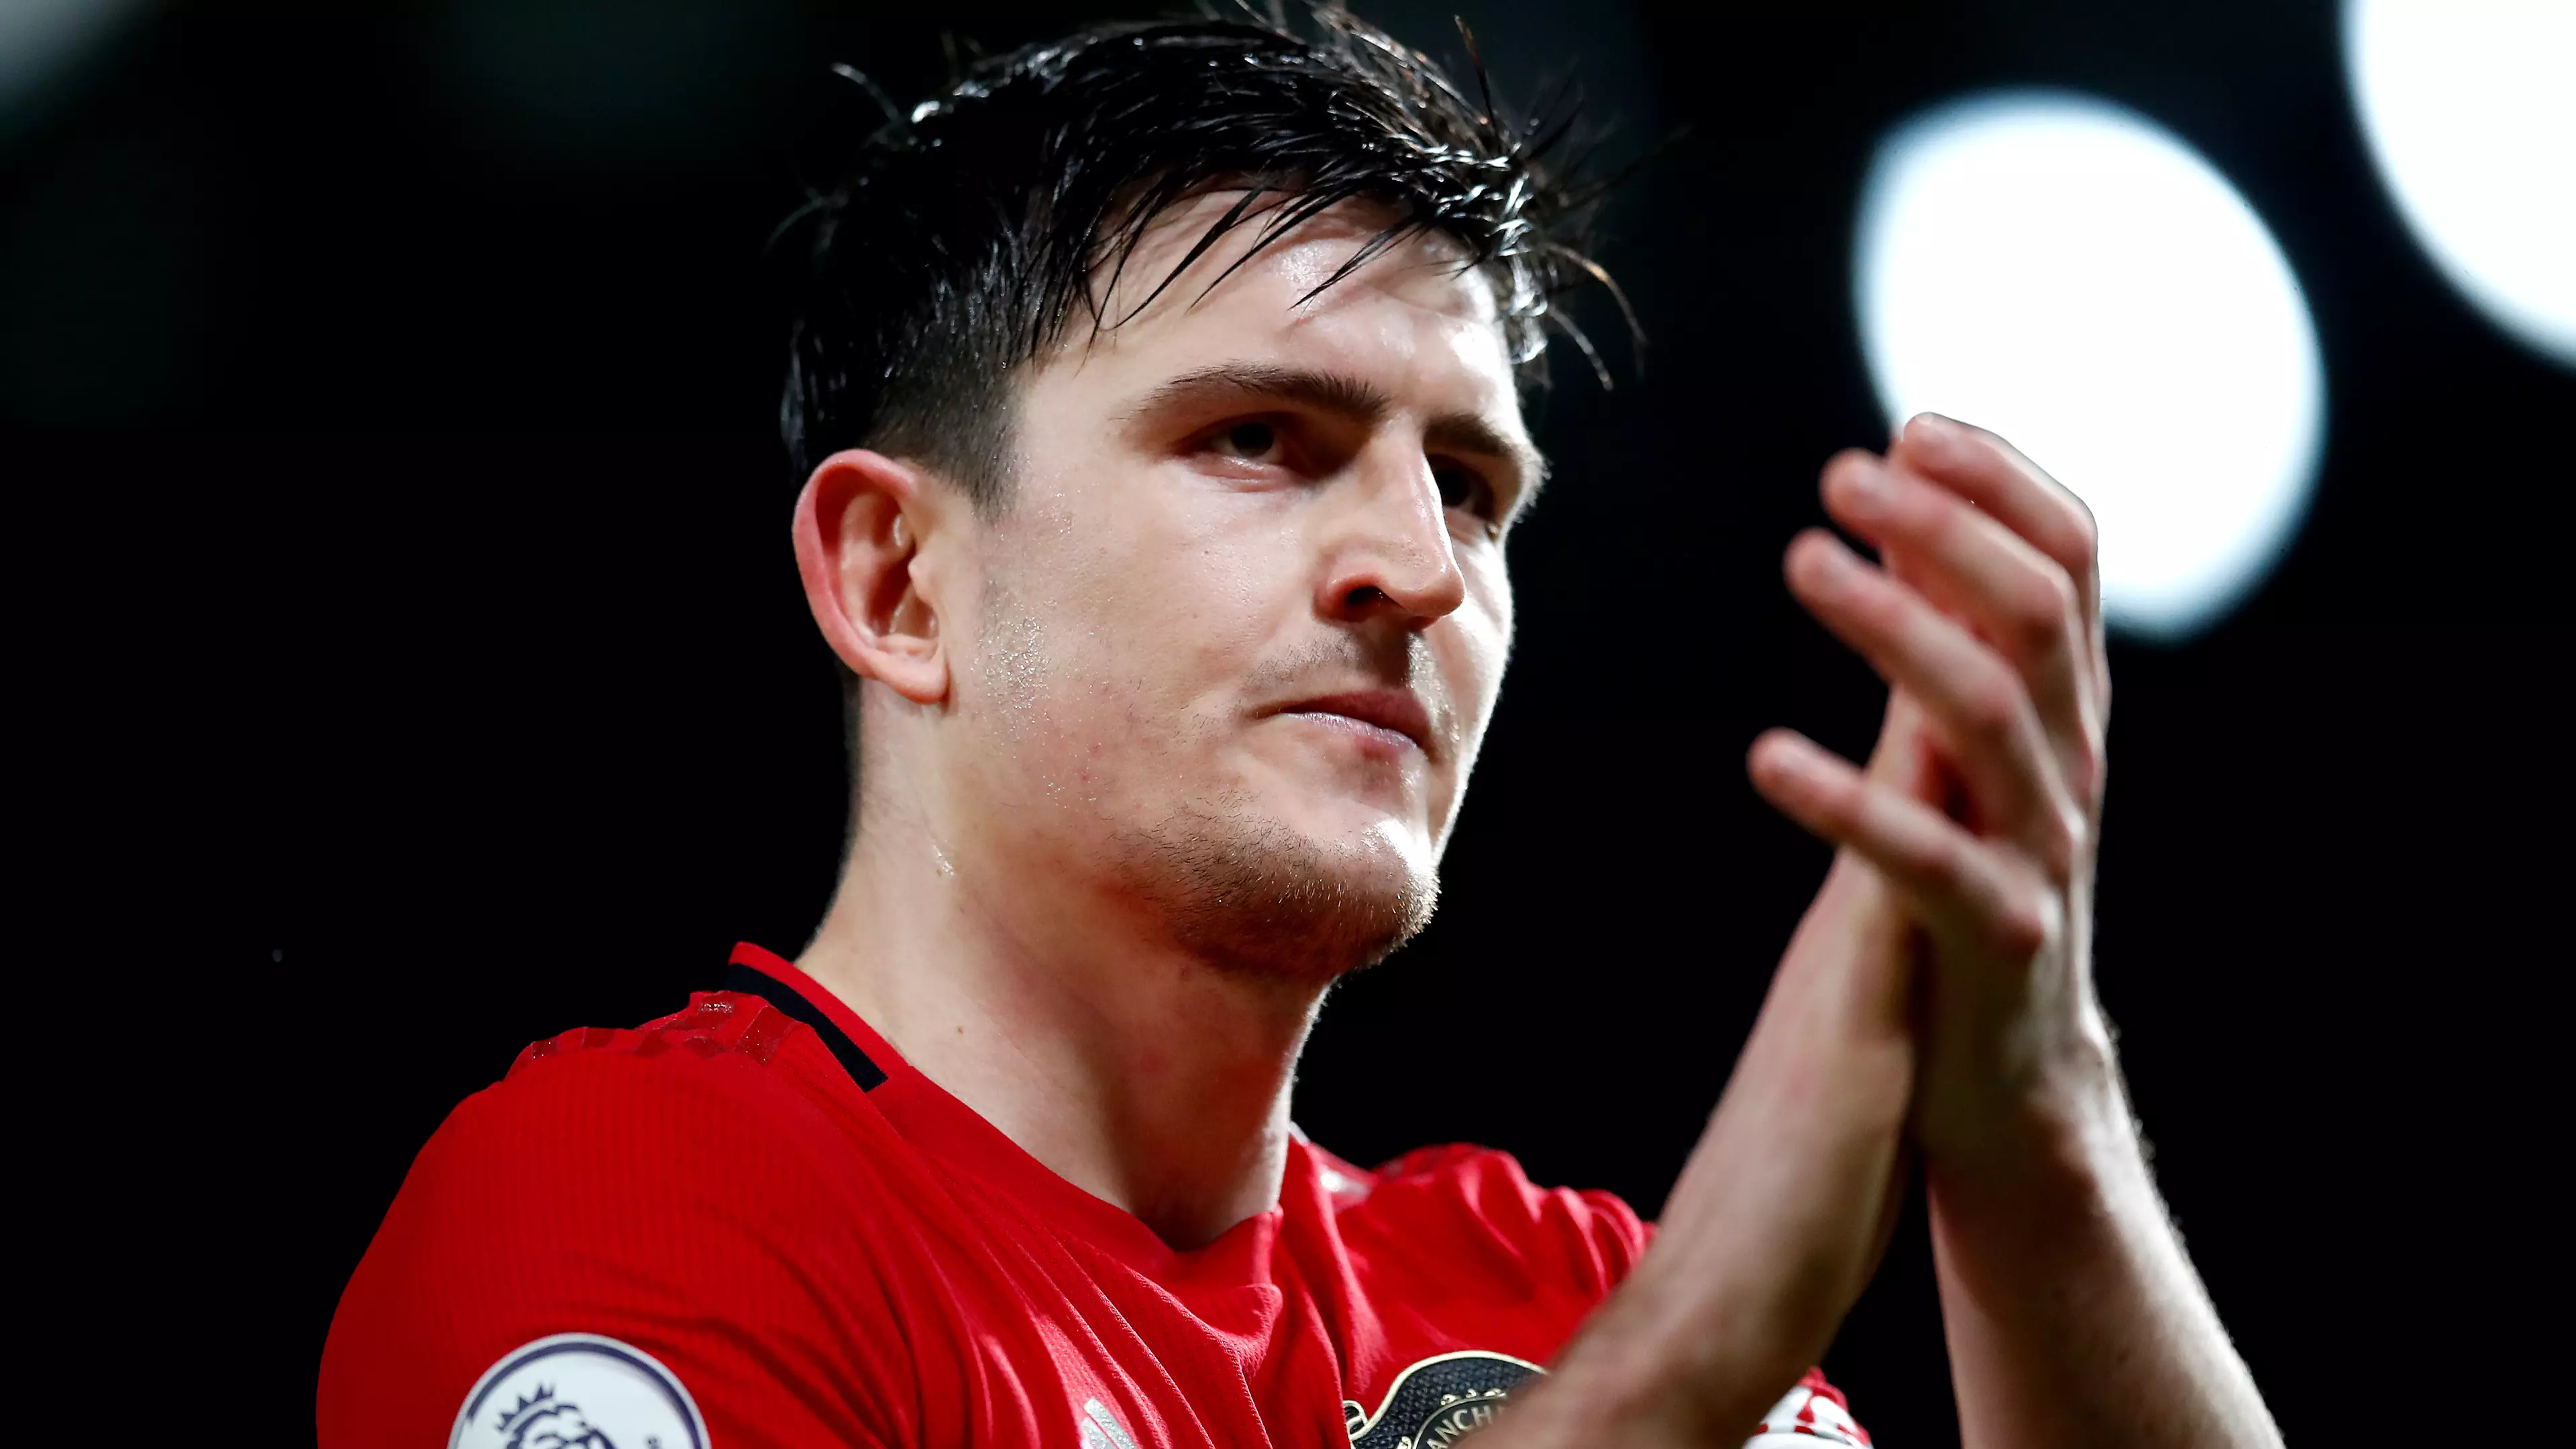 Harry Maguire Called Out For 'Lying' In Park Run Tweet